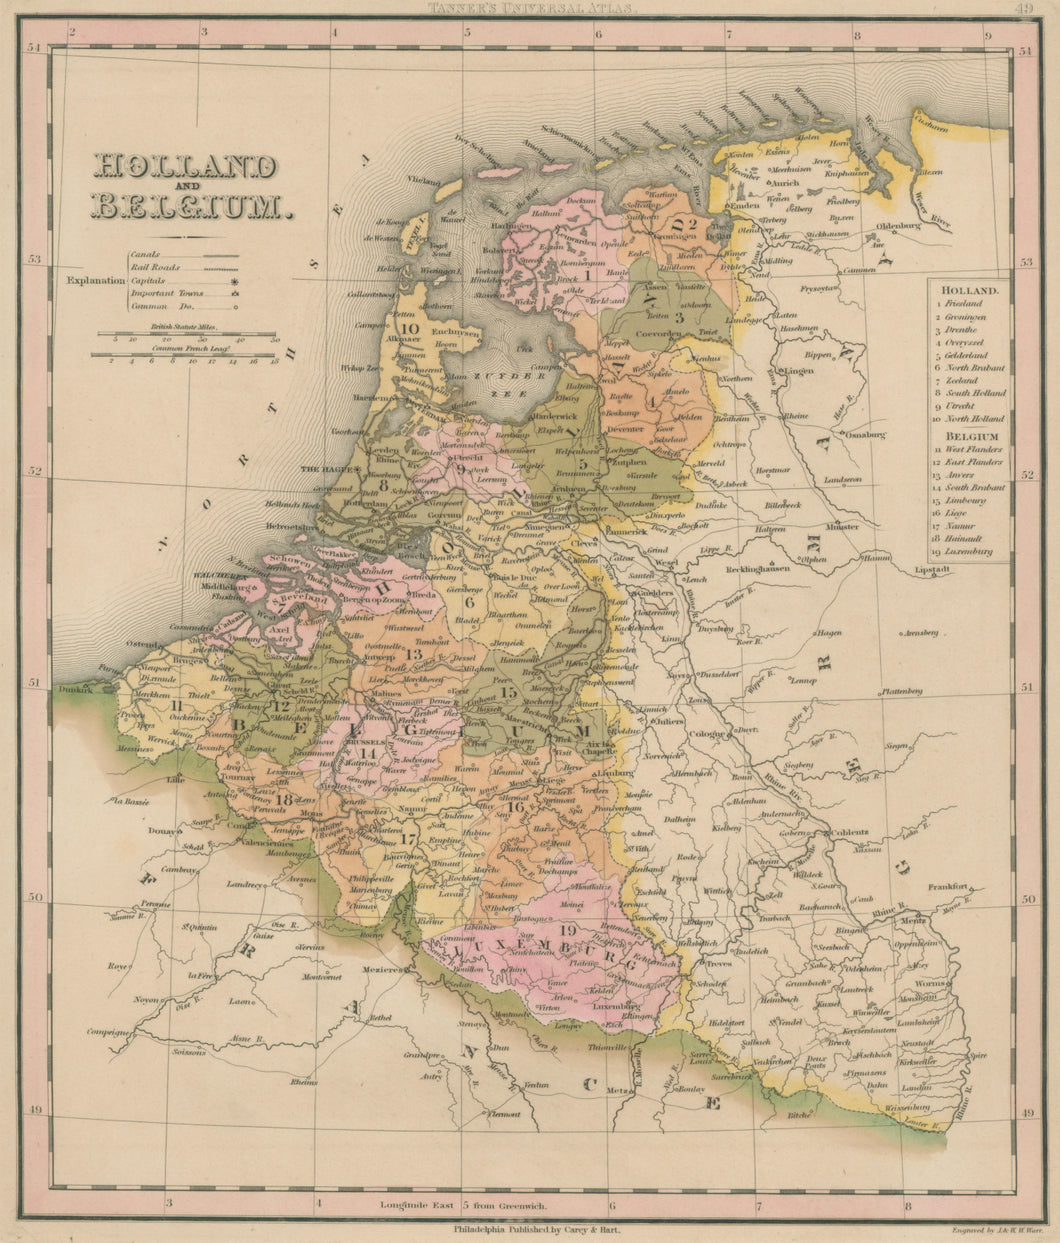 Tanner, Henry S. “Holland and Belgium.”  [Netherlands] 1844